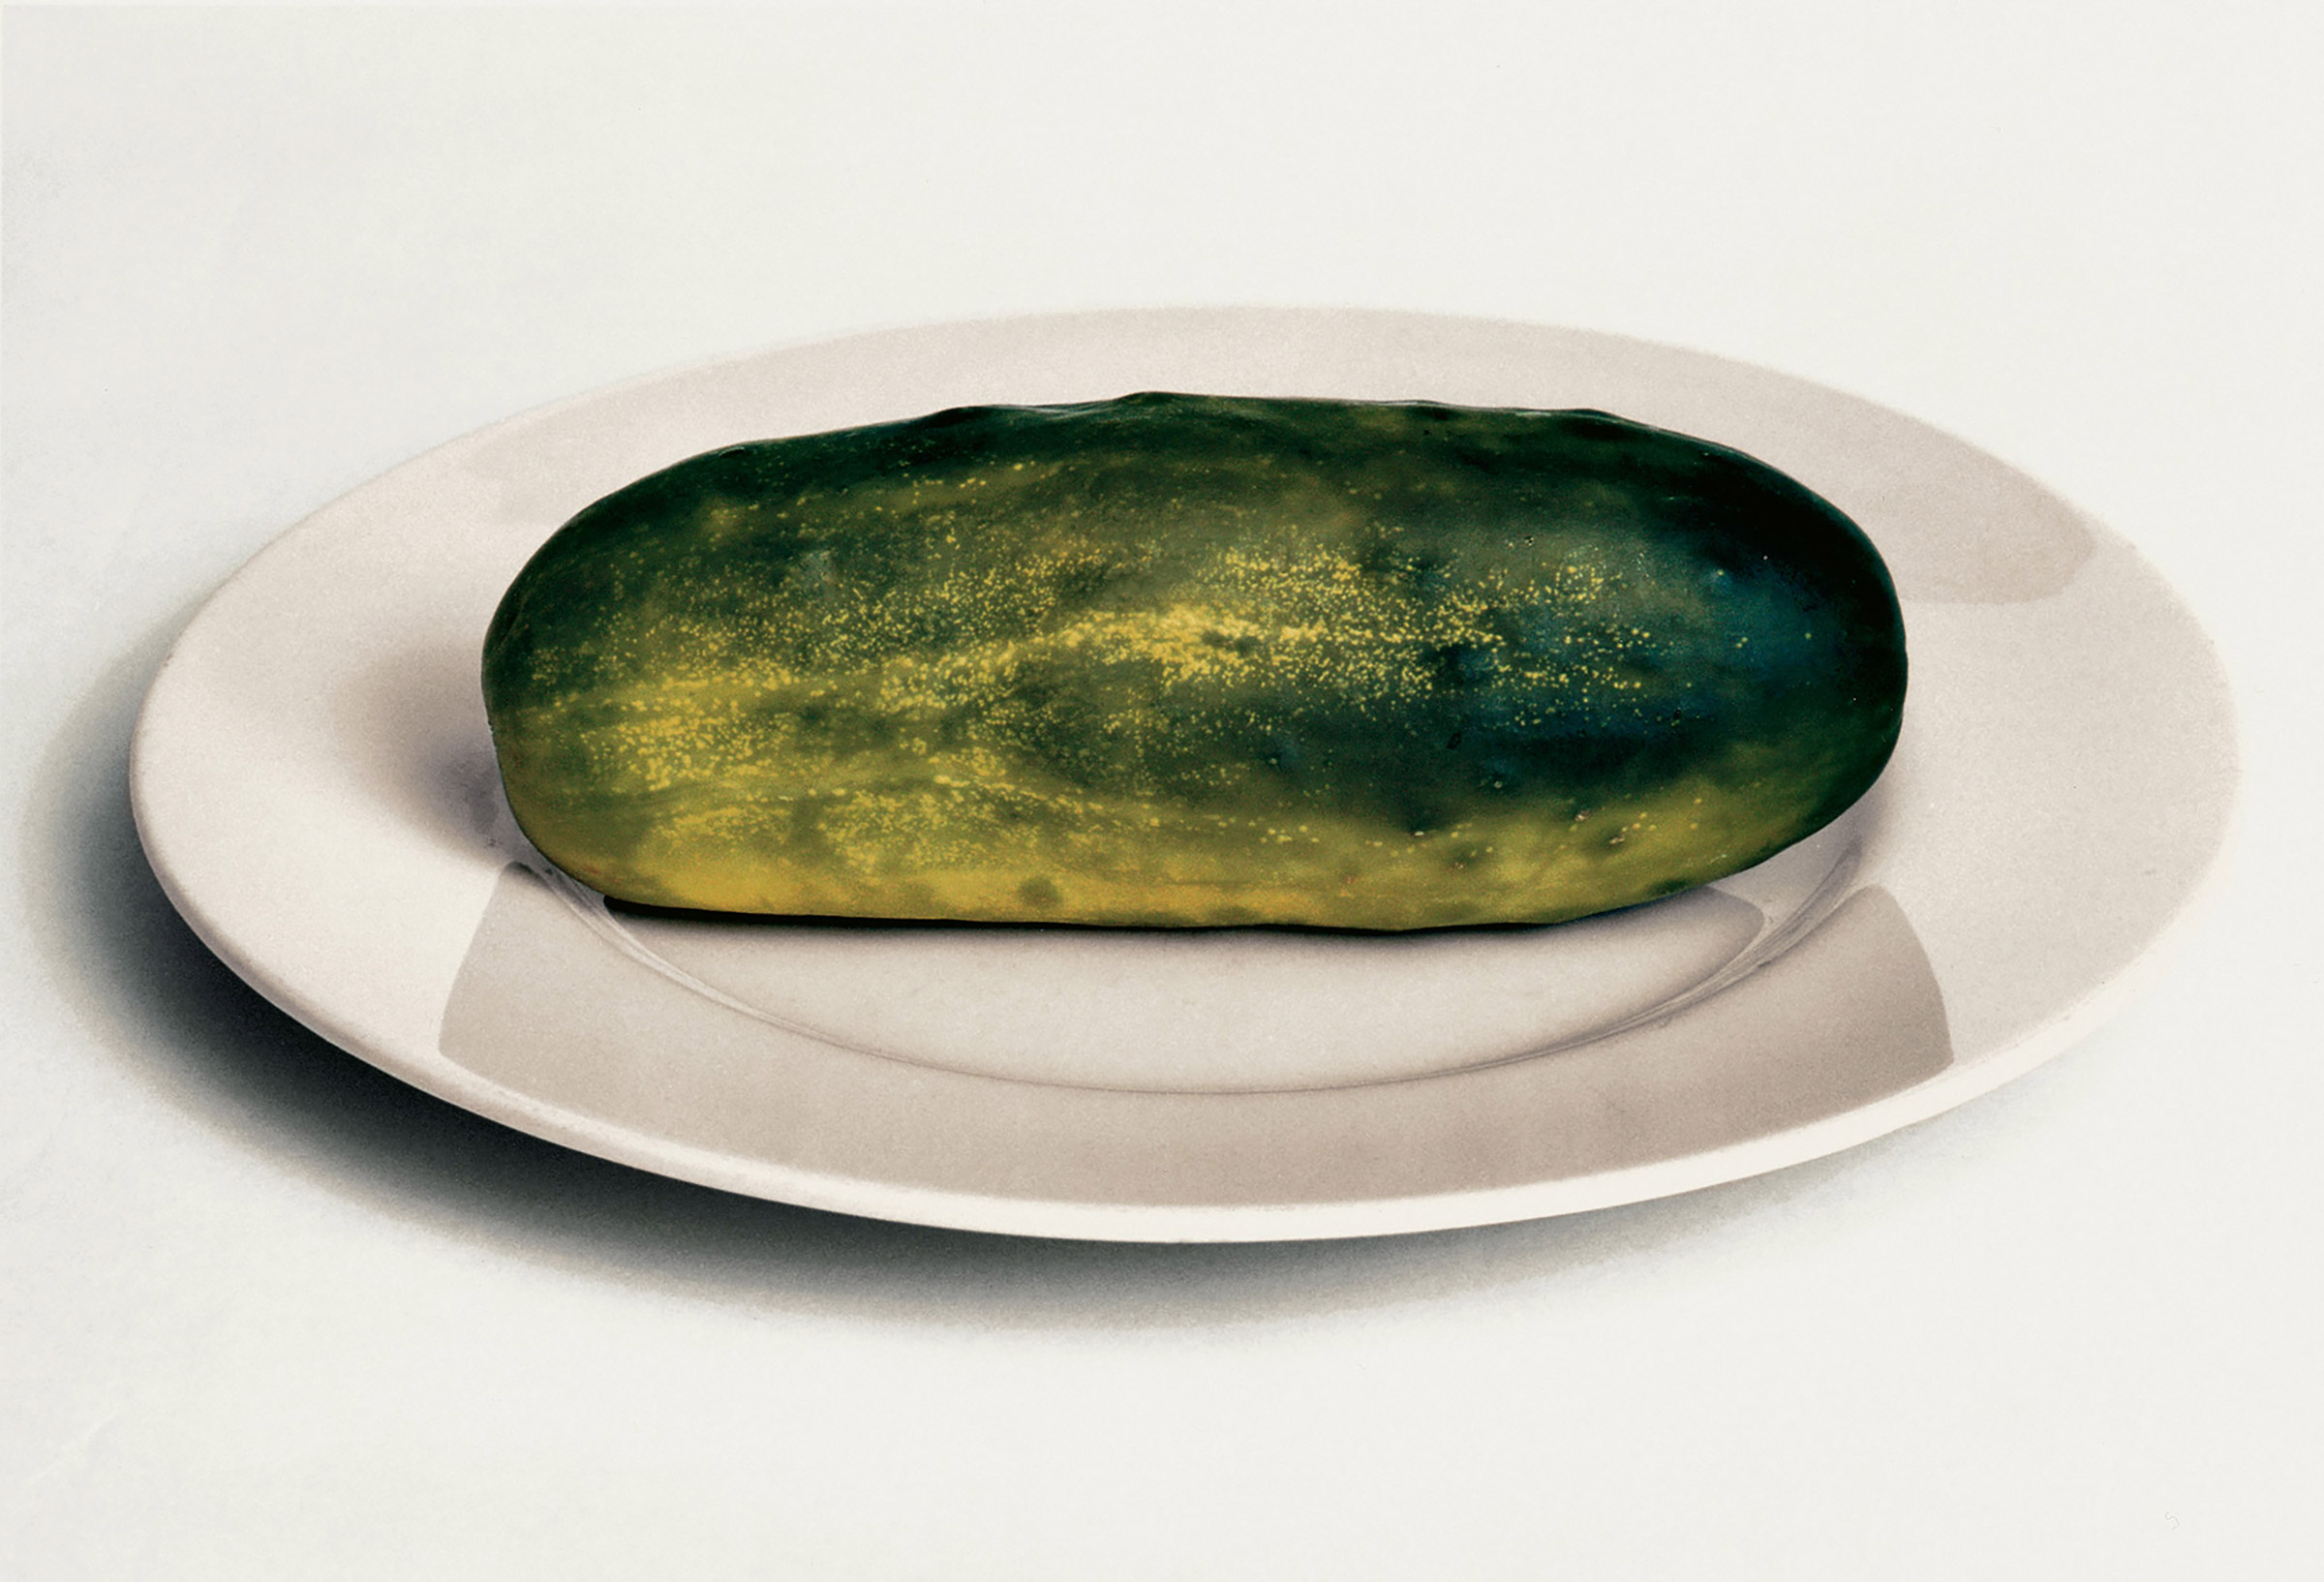 A Gursky Gherkin Is Just a Very Large Pickle, 2001 by Duane Michals (Duane Michals)